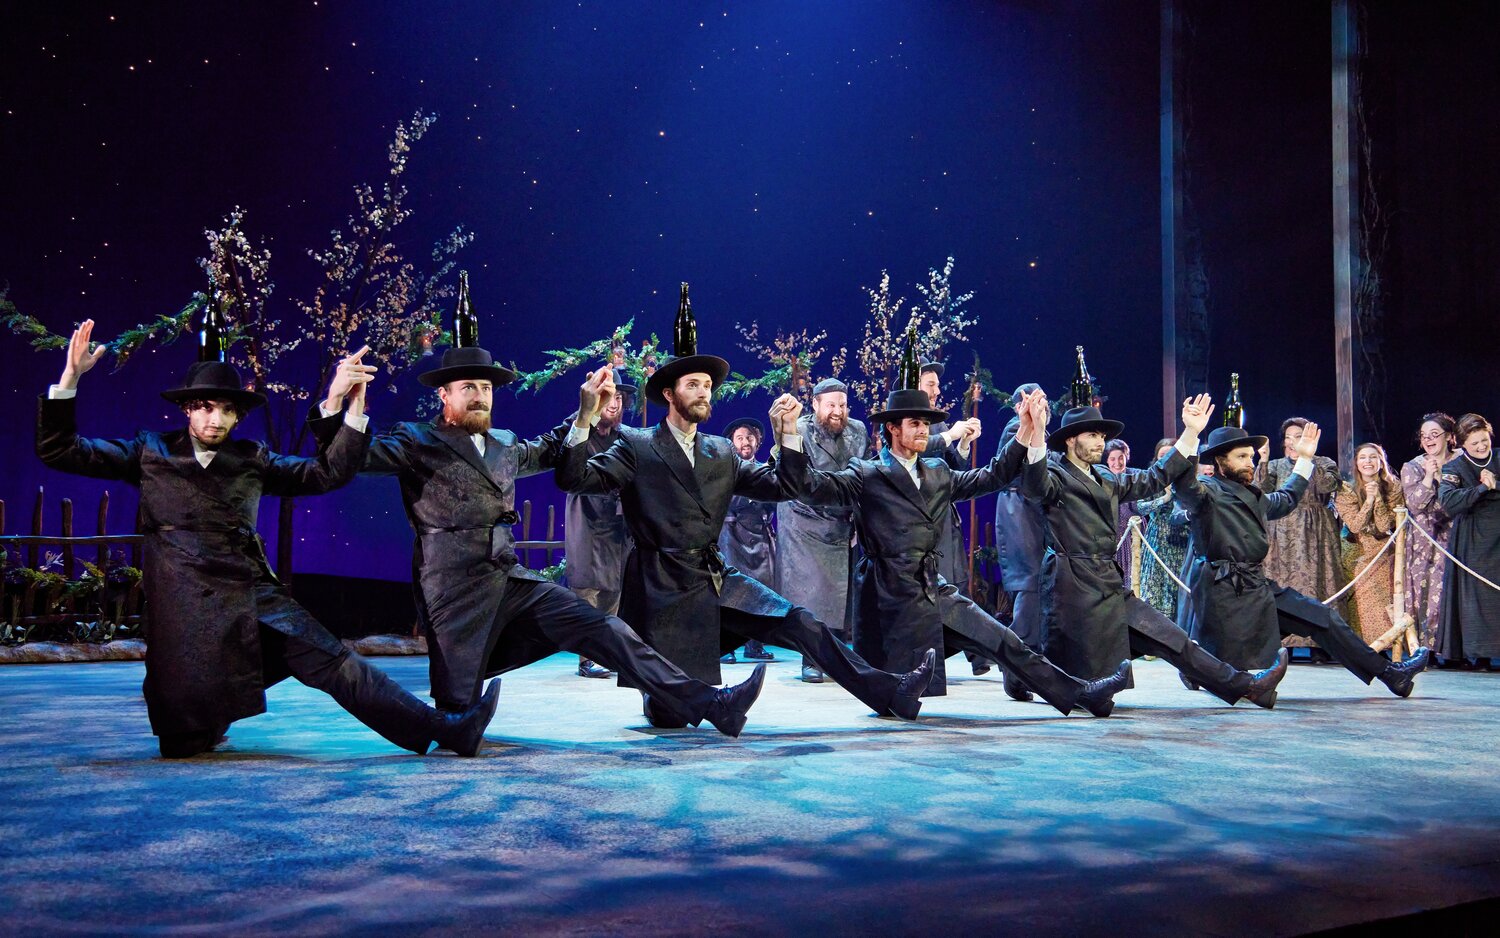 The company performs the Bottle Dance in Paper Mill Playhouse’s “Fiddler on the Roof,” directed by Mark S. Hoebee.